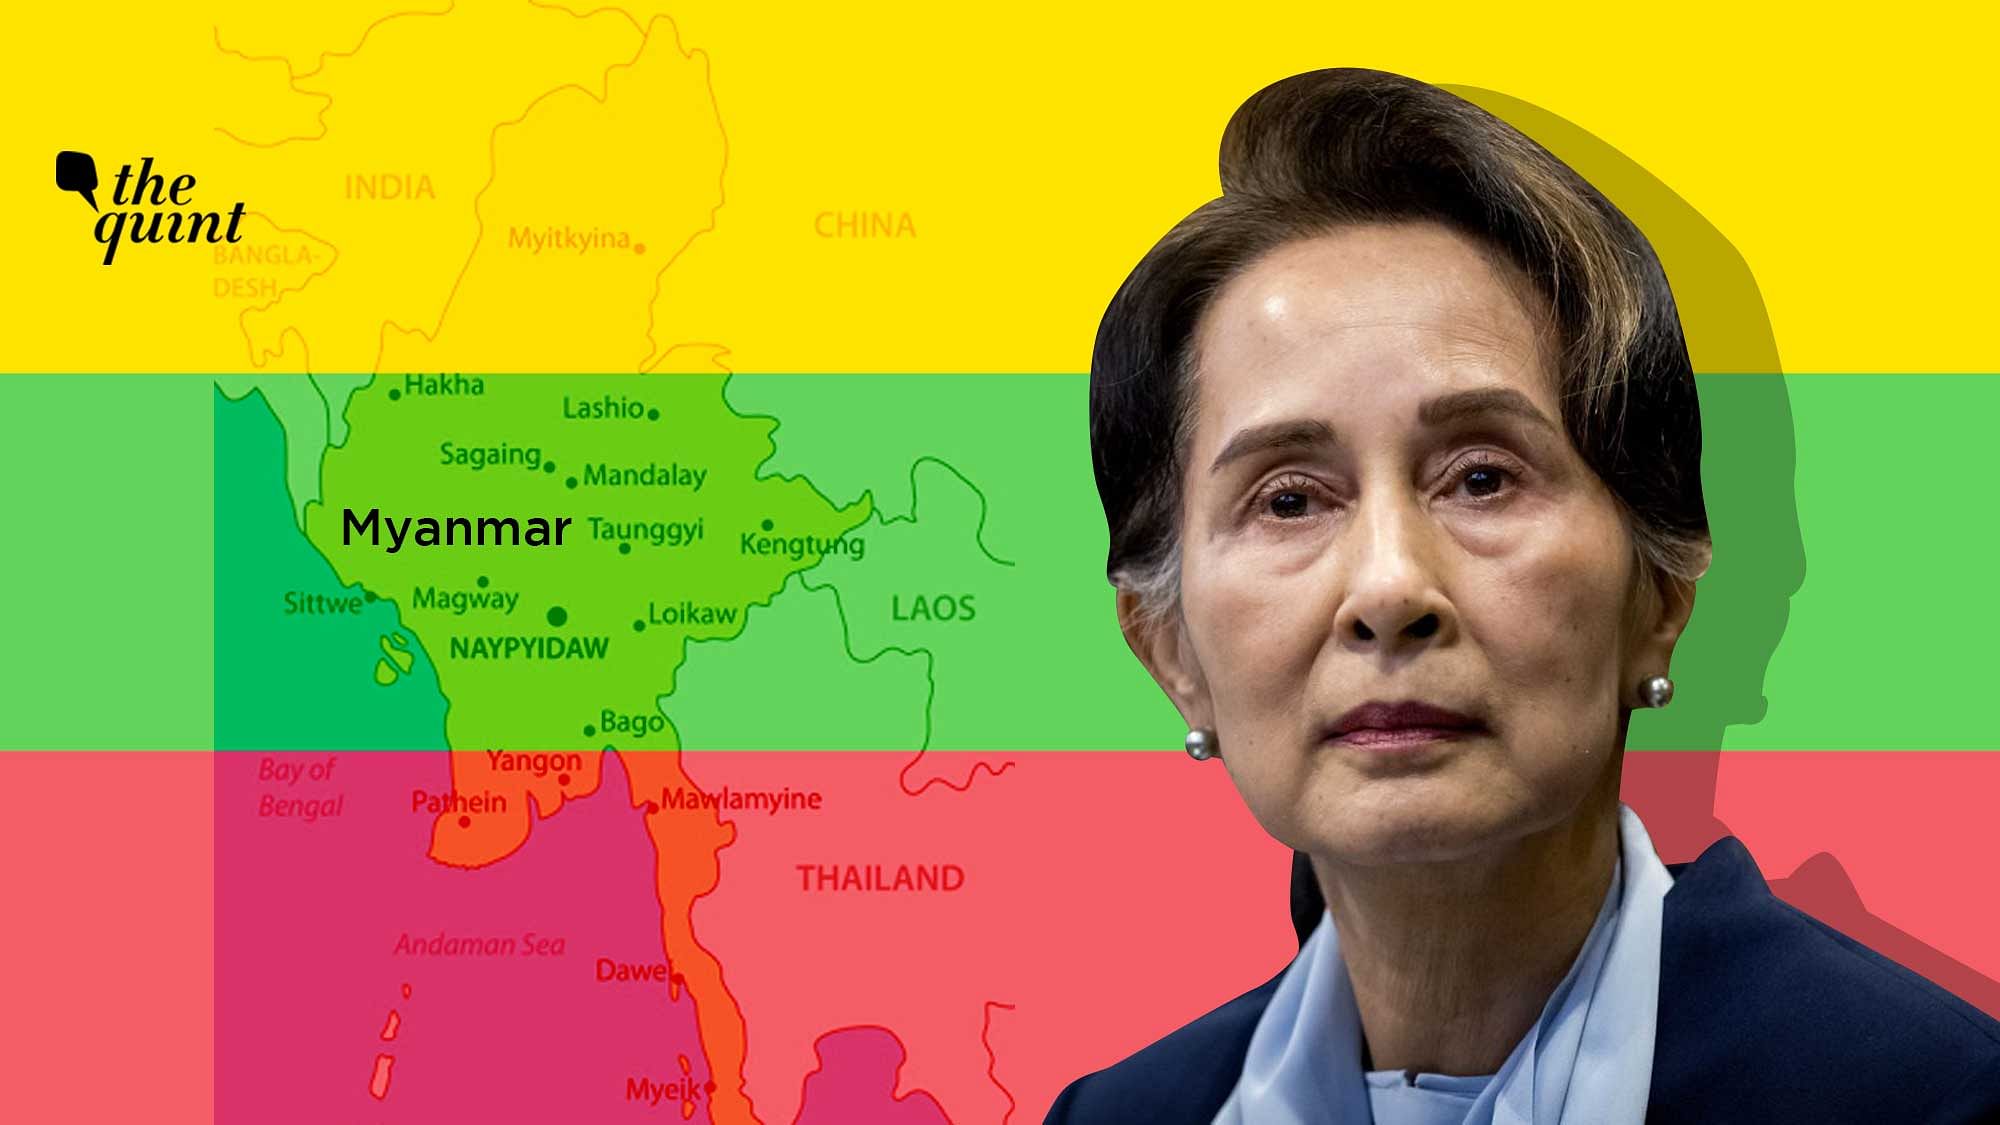 Myanmar’s de facto leader Aung San Suu Kyi was detained, along with her ally President Win Myint, and other senior leaders early on Monday, 1 February, following a military coup in the country.